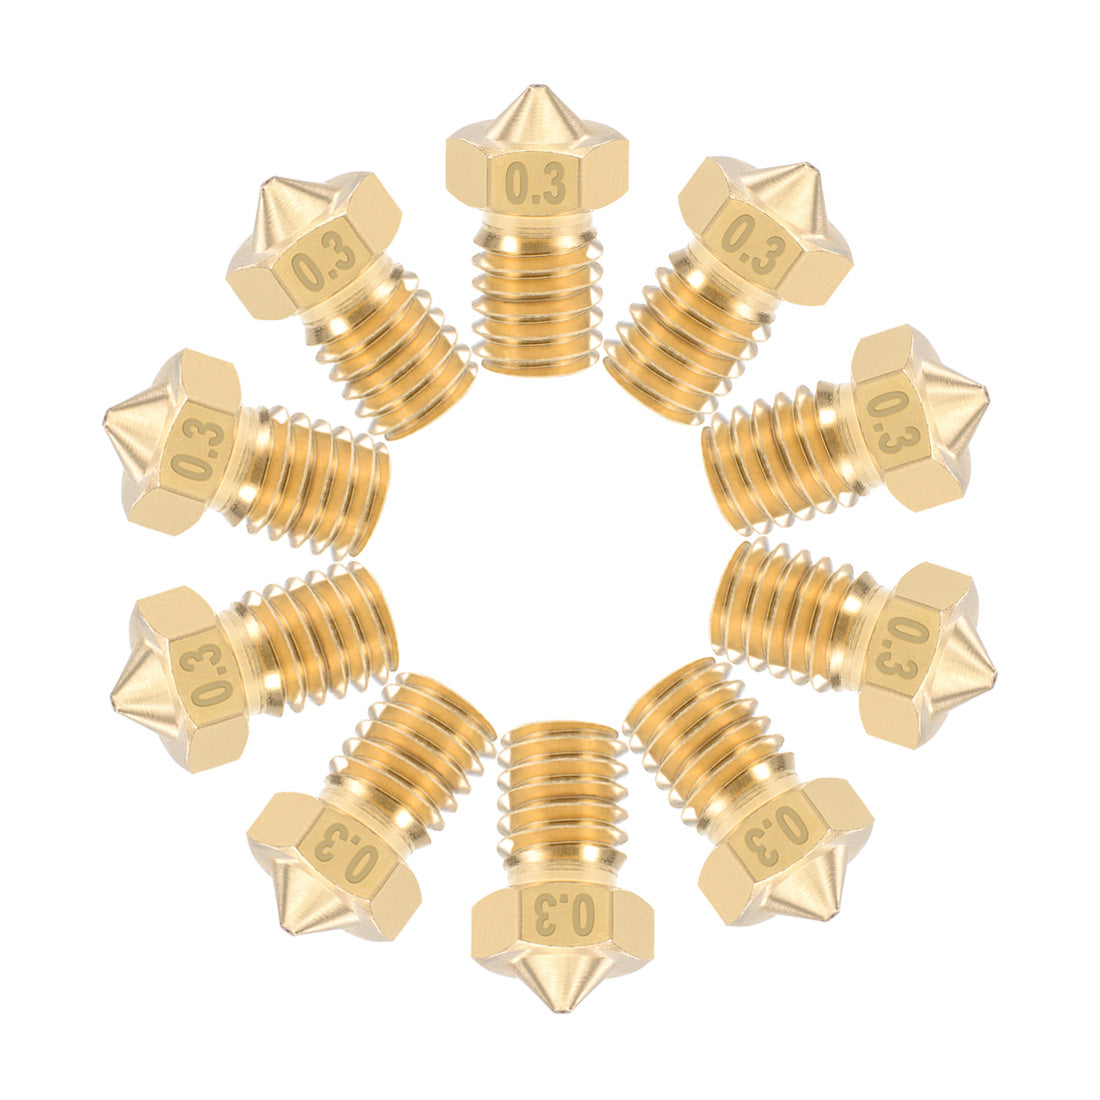 uxcell Uxcell 0.3mm 3D Printer Nozzle Head M6 for V5 V6 2mm Extruder Print, Brass 10pcs